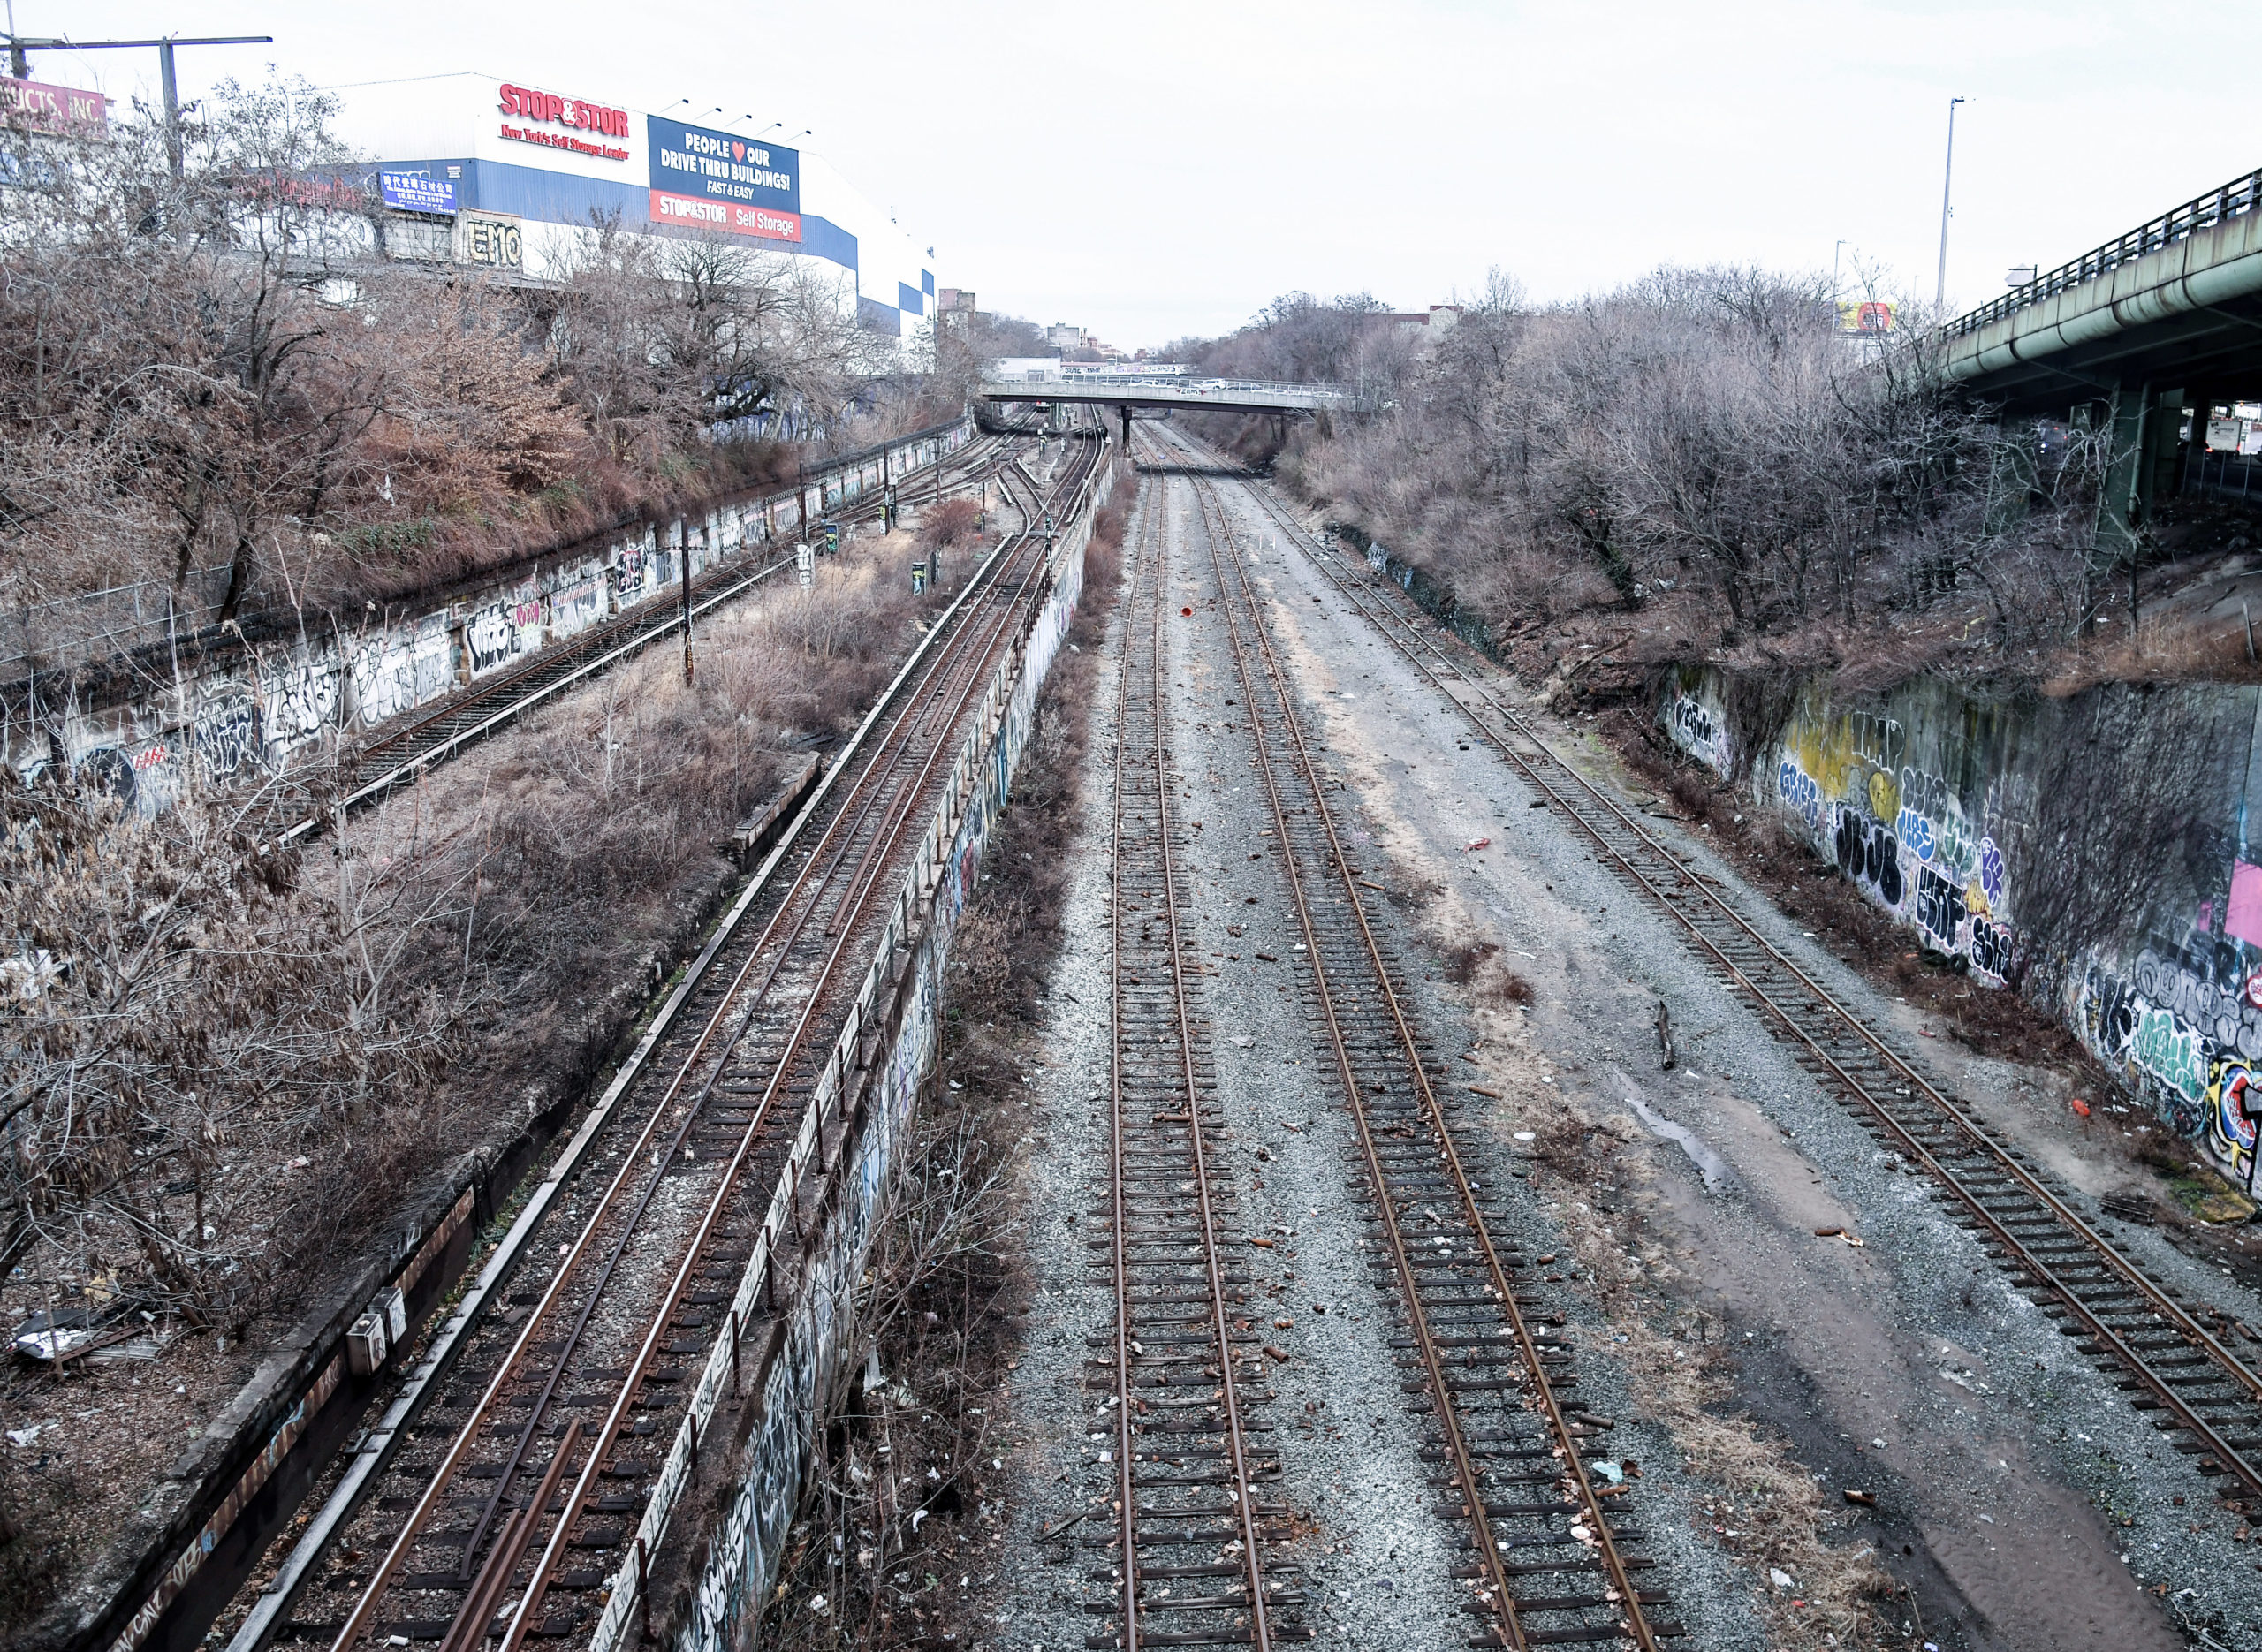 The Bay Ridge Branch tracks below 5th Ave., currently owned by the Long Island Rail Road, which would be incorporated in the proposed Interborough Express. Thursday, Jan. 20, 2022. Photo: Marc A. Hermann / MTA